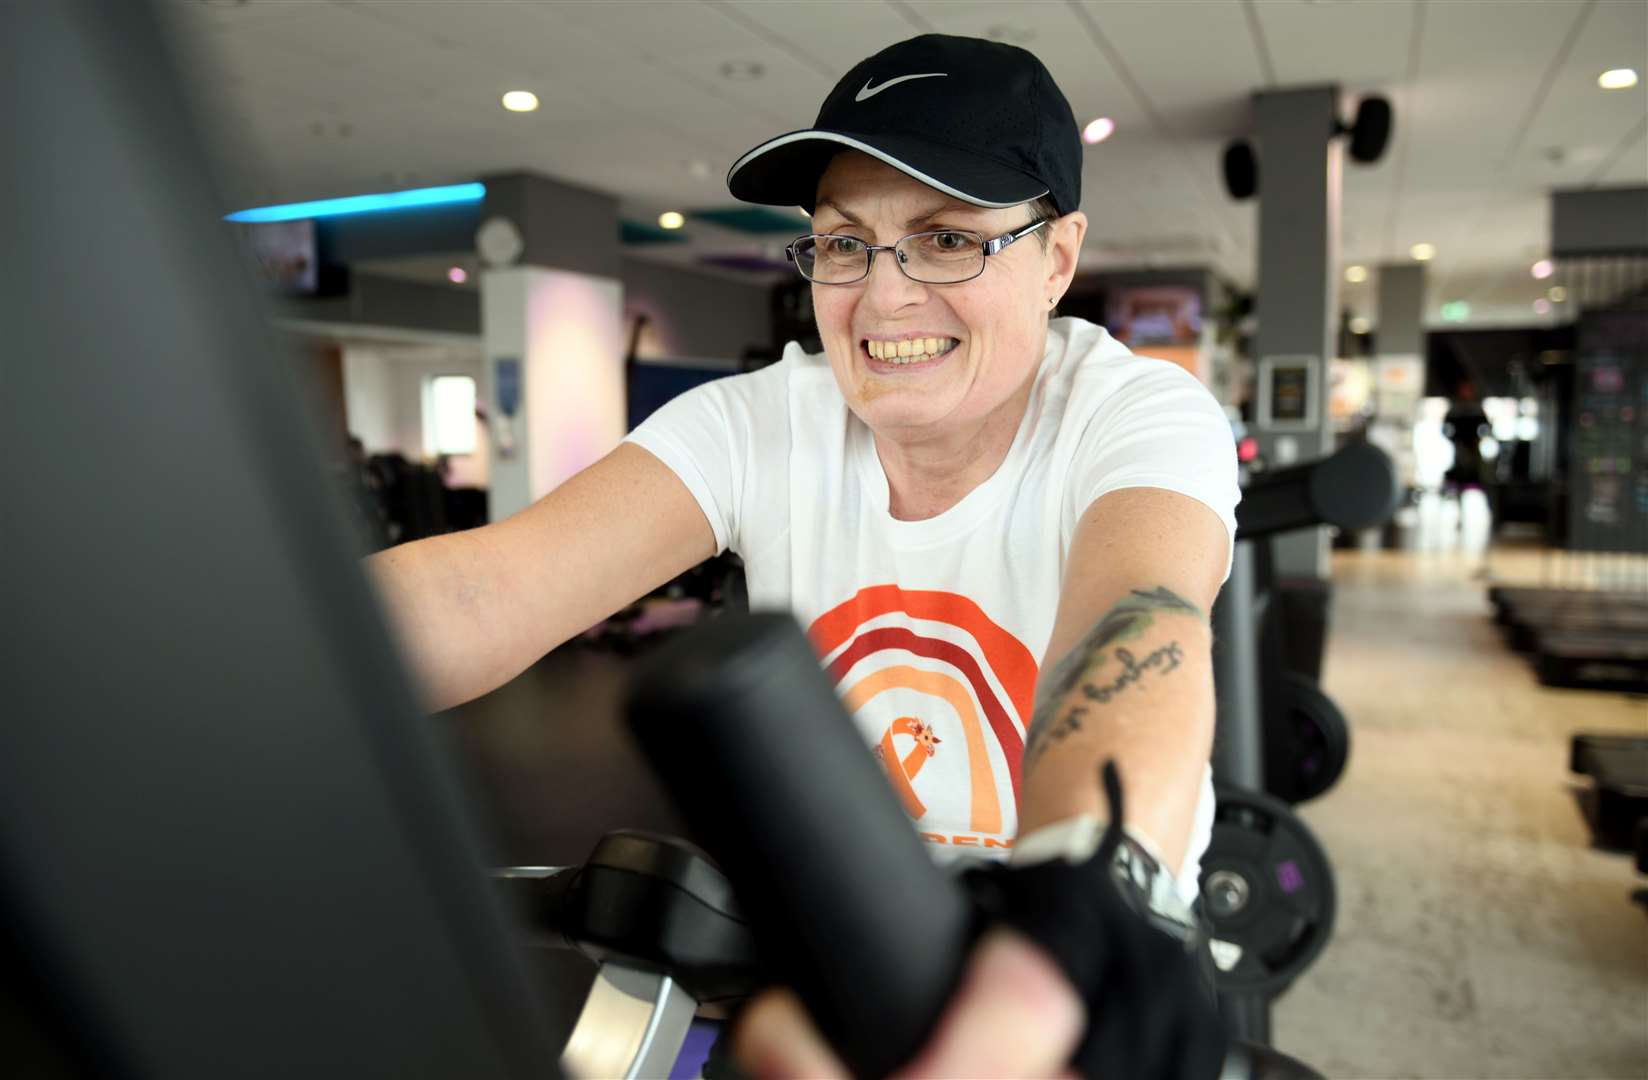 Juliet Hyslop has been given access to the cycle machines at Anytime Fitness to complete her fundraiser to raise money for FND support. Picture: James Mackenzie.